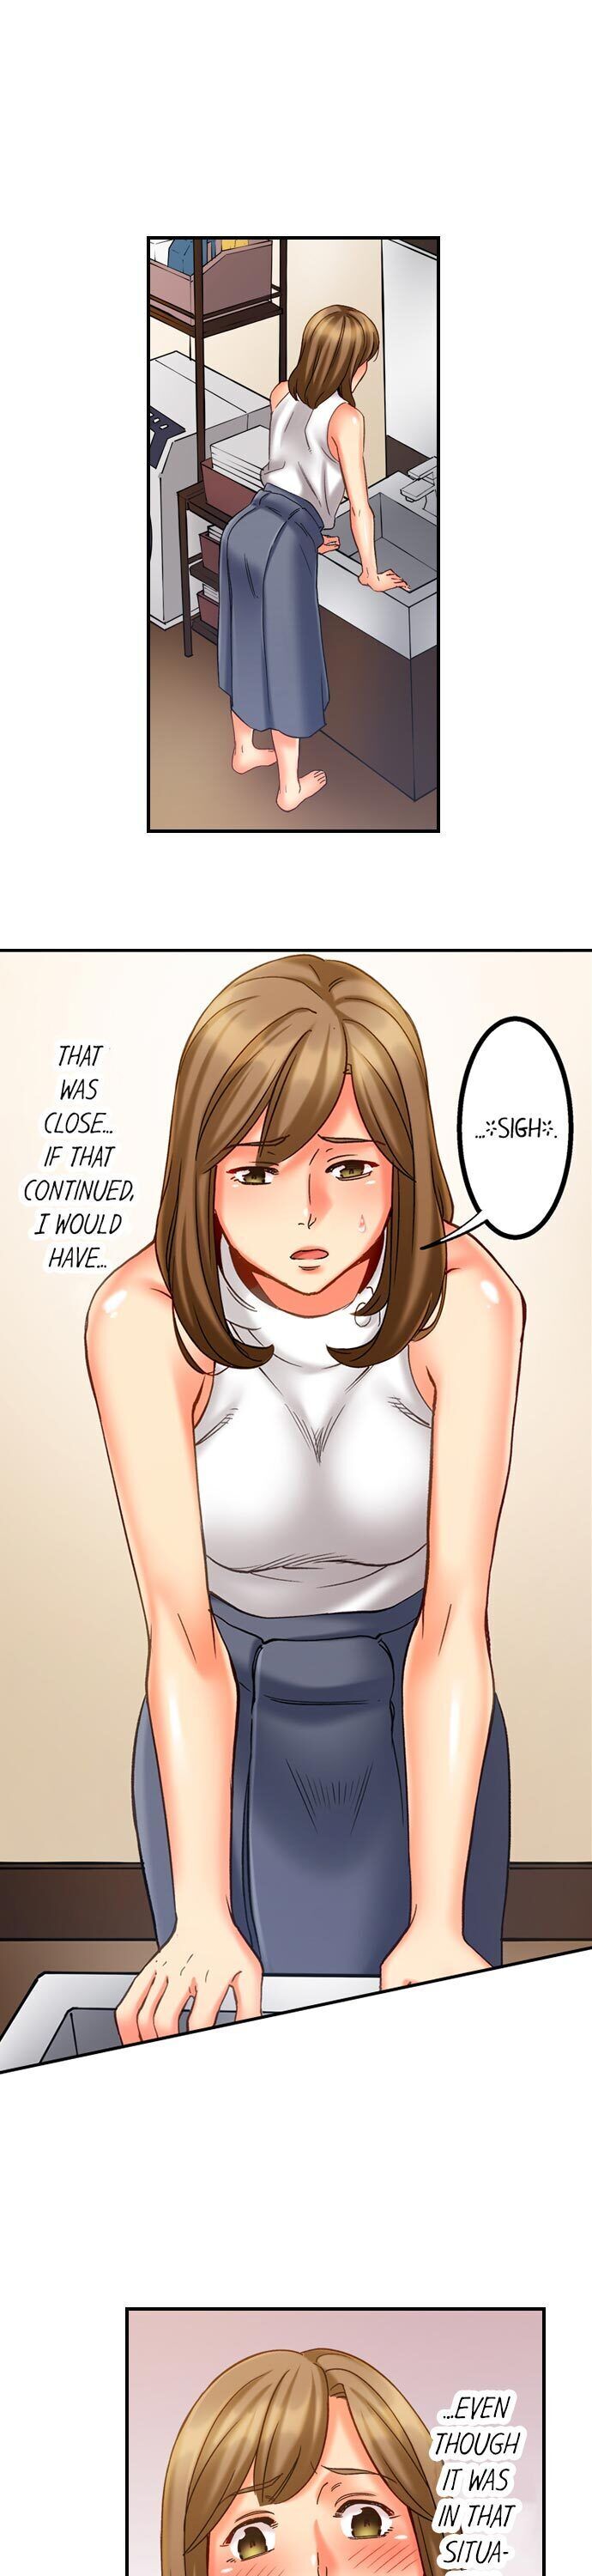 Banging My Ex's Daughter - Chapter 14 Page 4